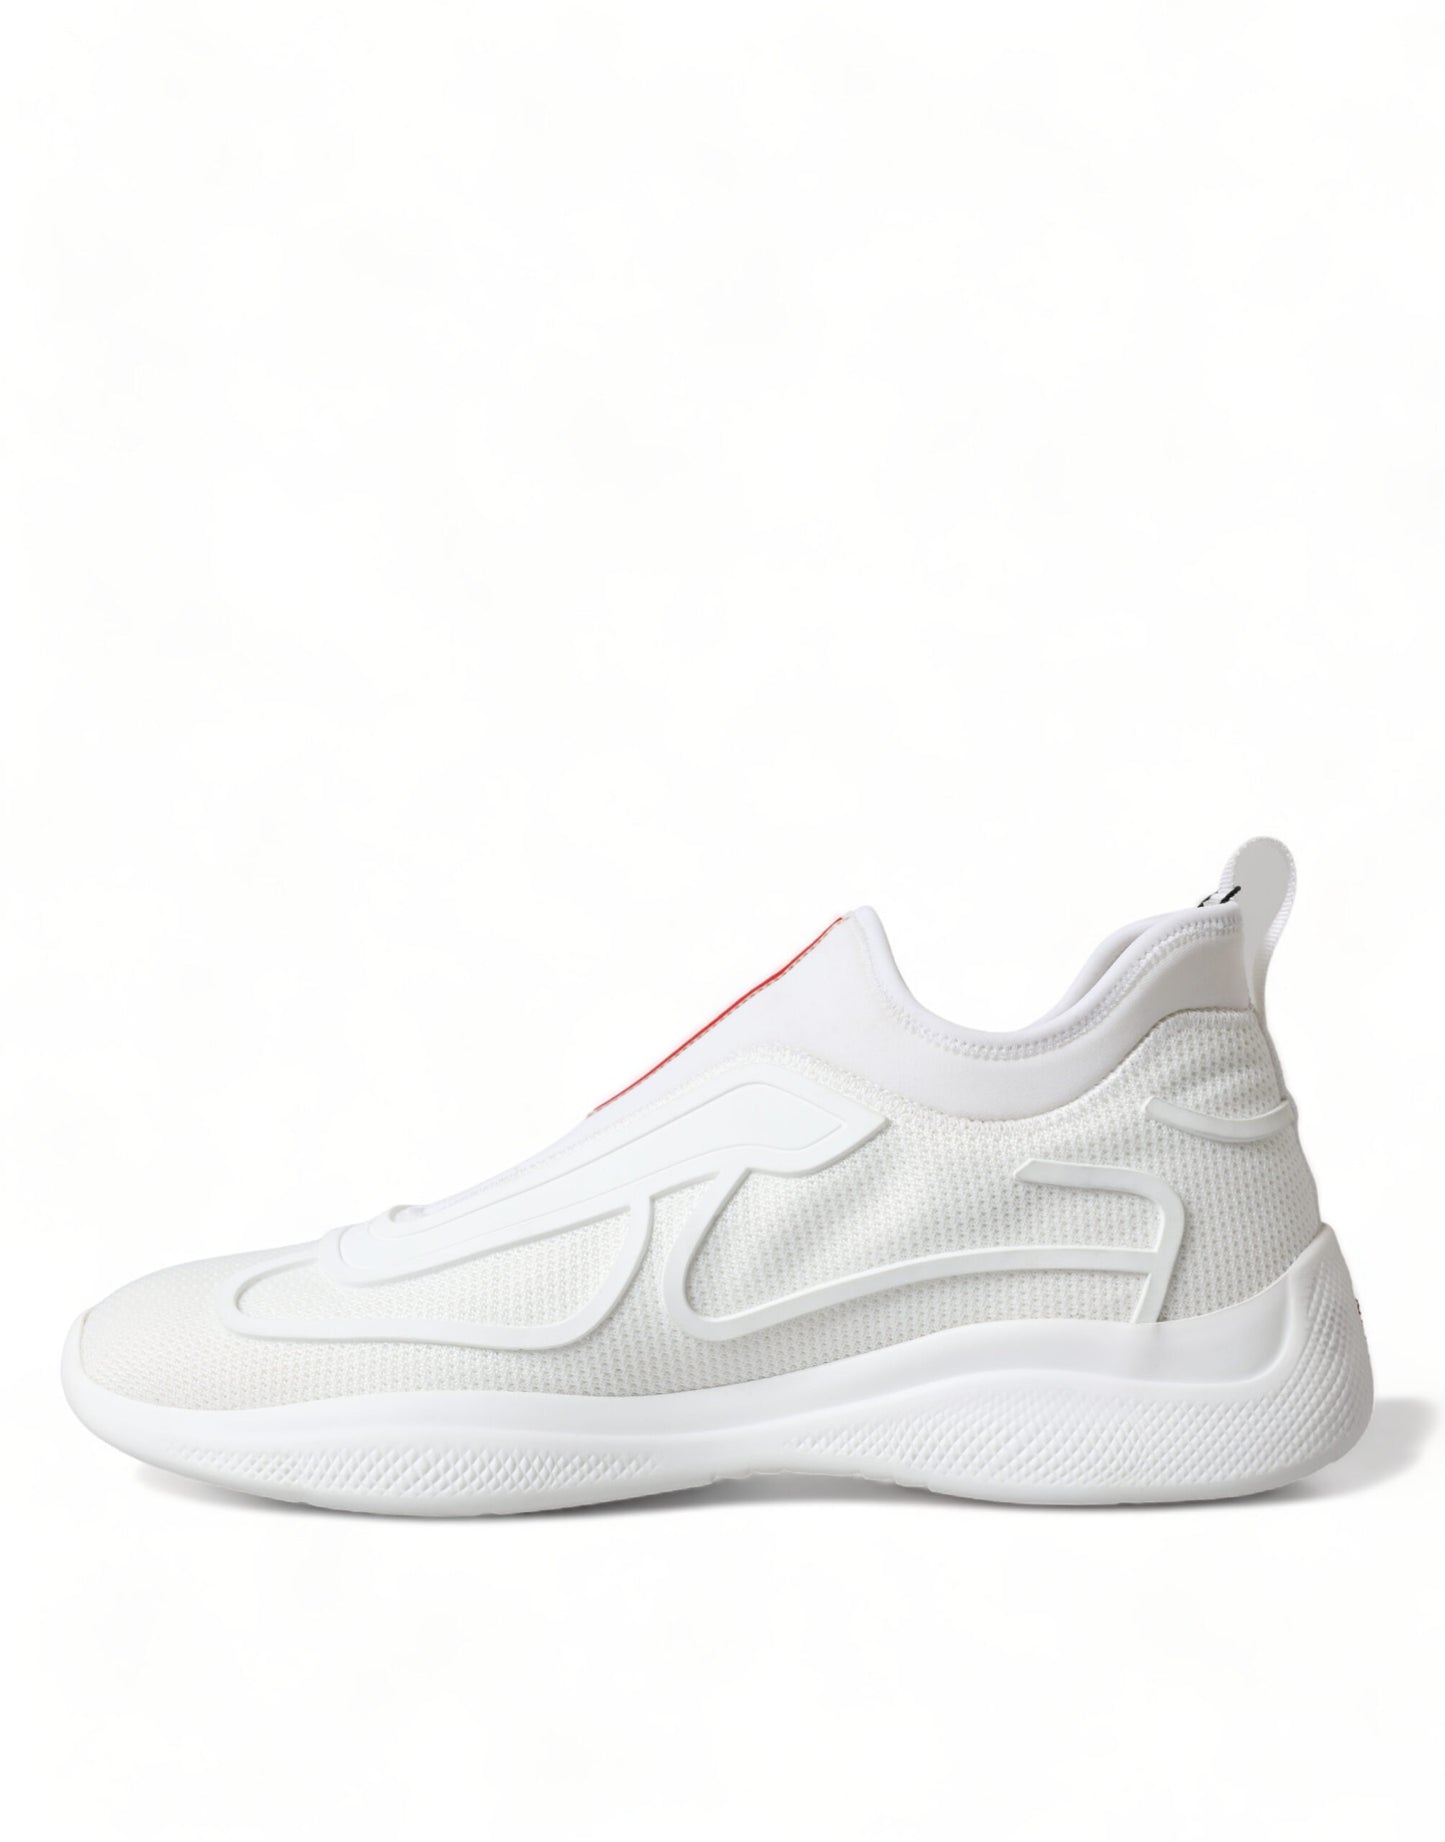 Elevate Your Style with Sleek White Knit Sneakers